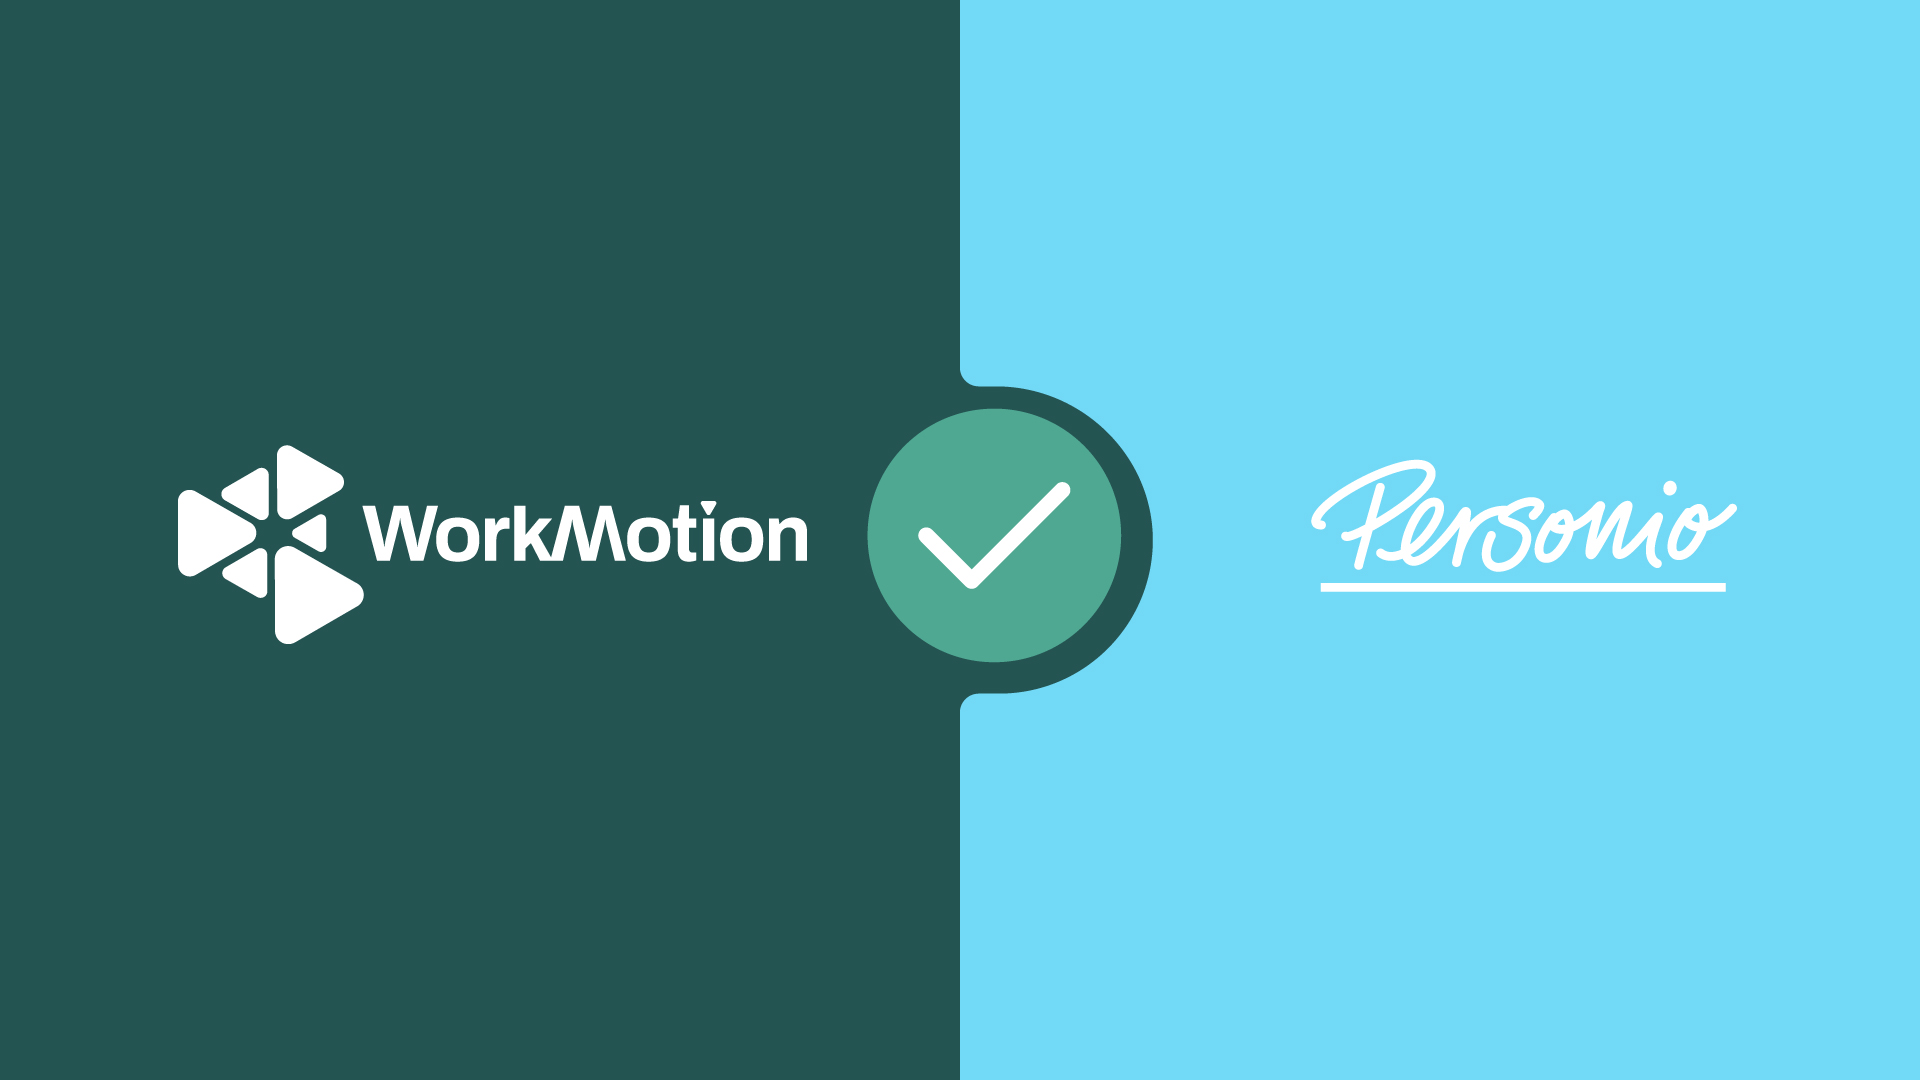 WorkMotion and Personio announce integration for global remote employee management